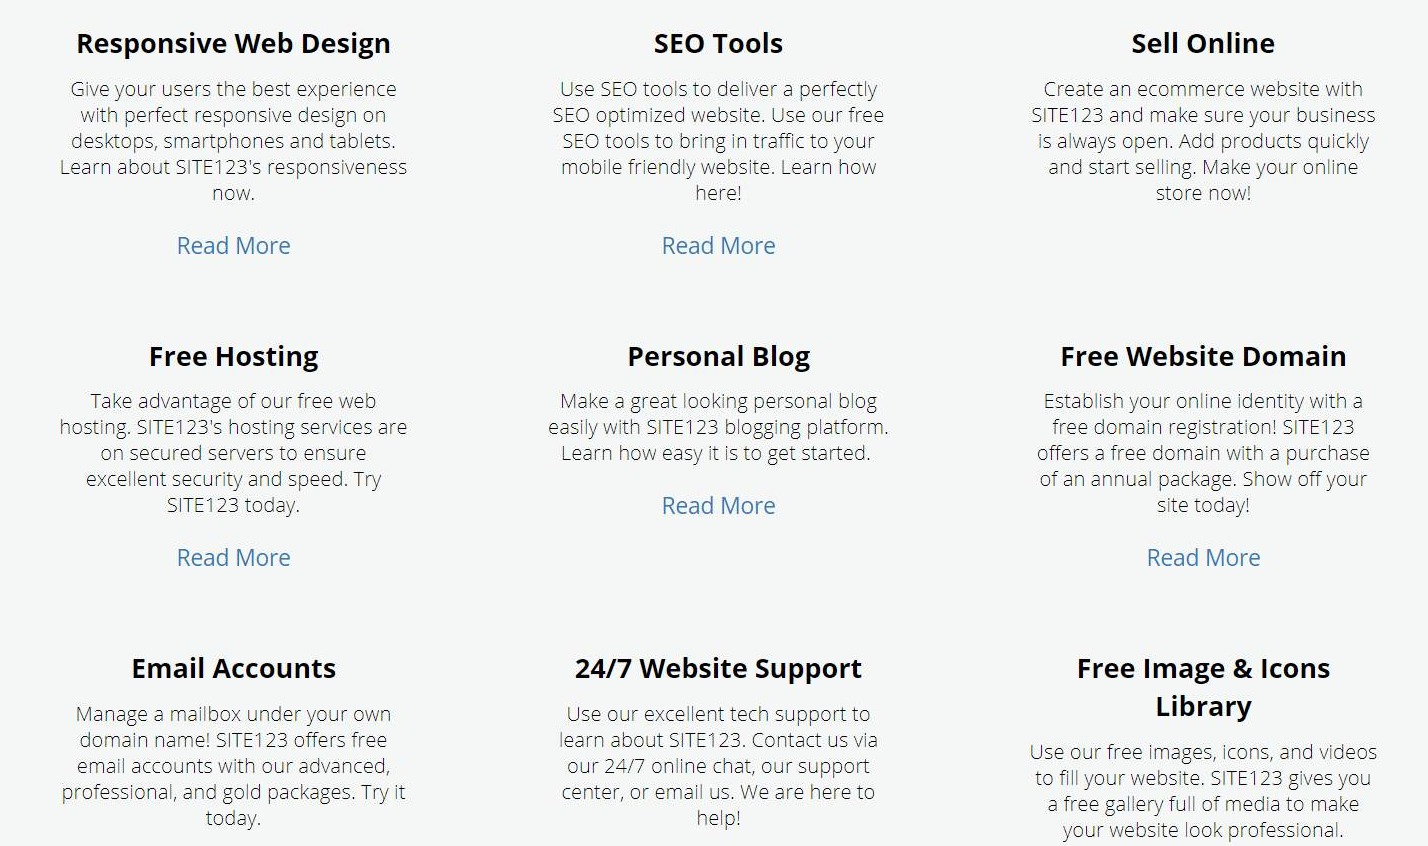 Site123 features and functionalities